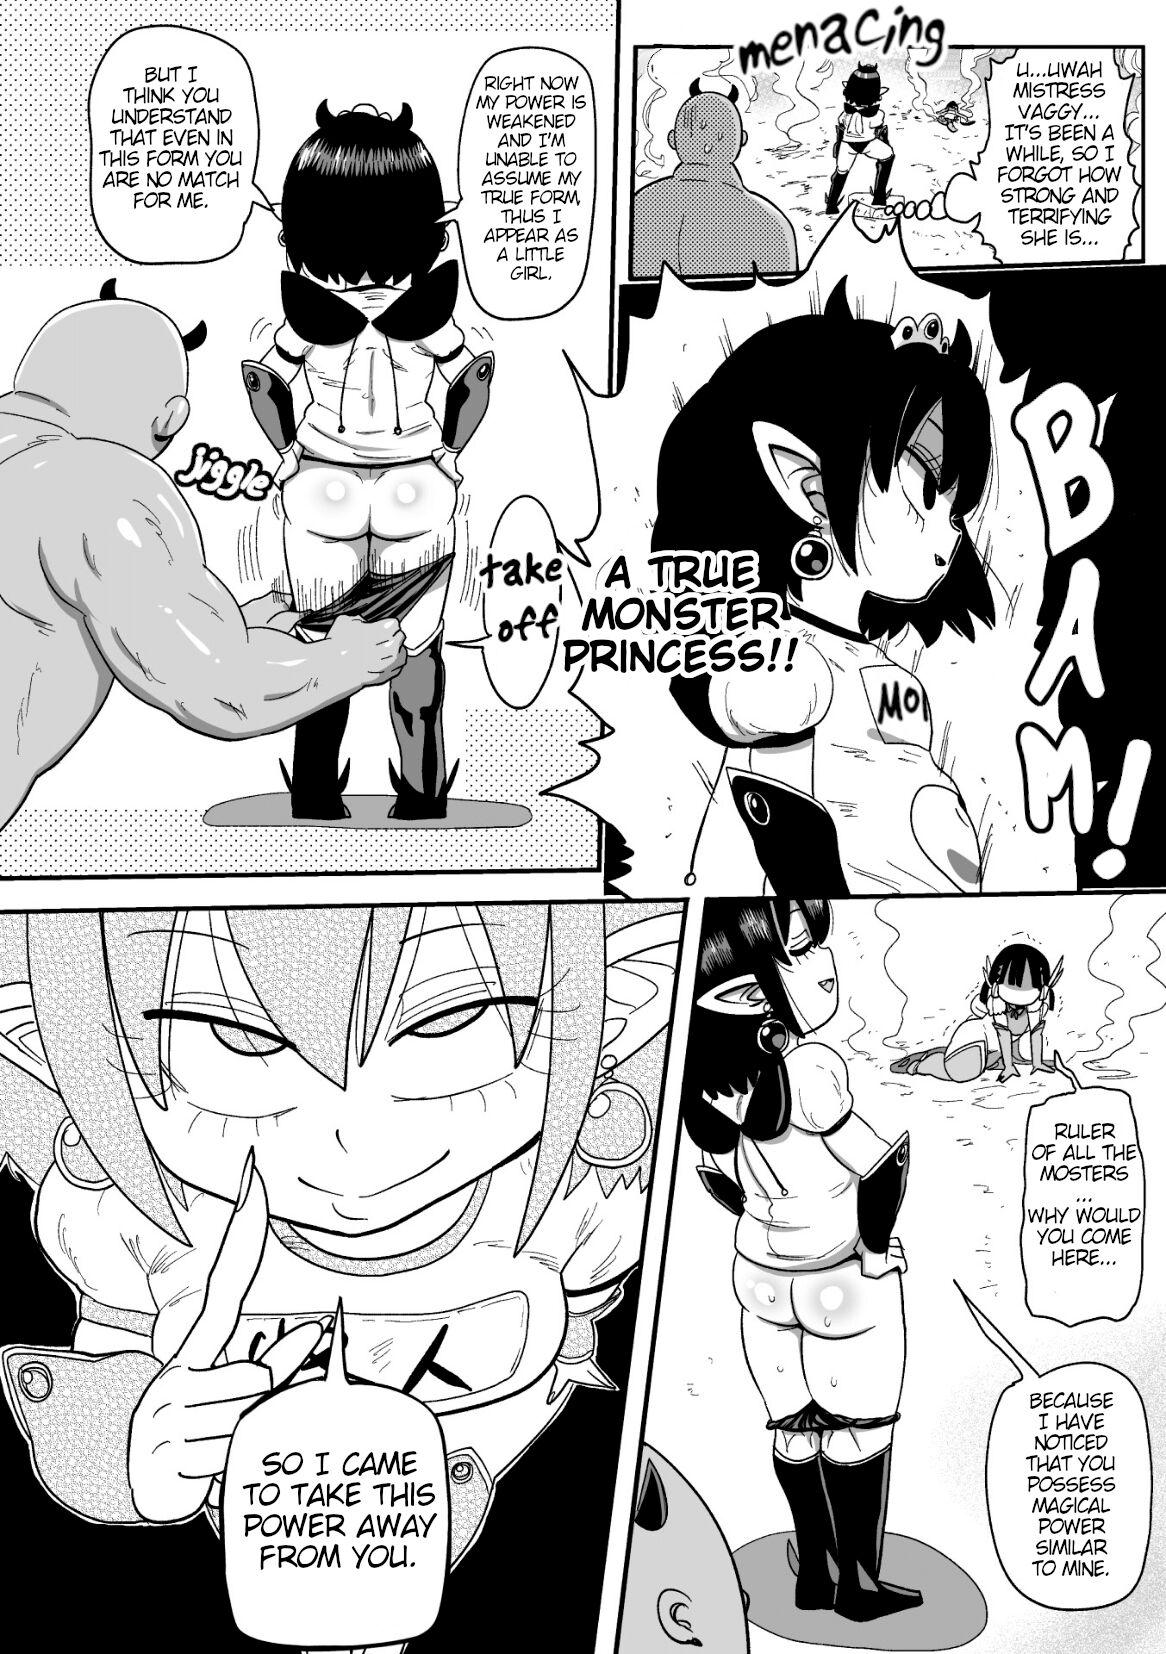 Sex Party Magical Girl In Training - Ana Ch. 3 | Yousei no Mahou Shoujo Anna Ch. 3 - Original Moms - Page 6